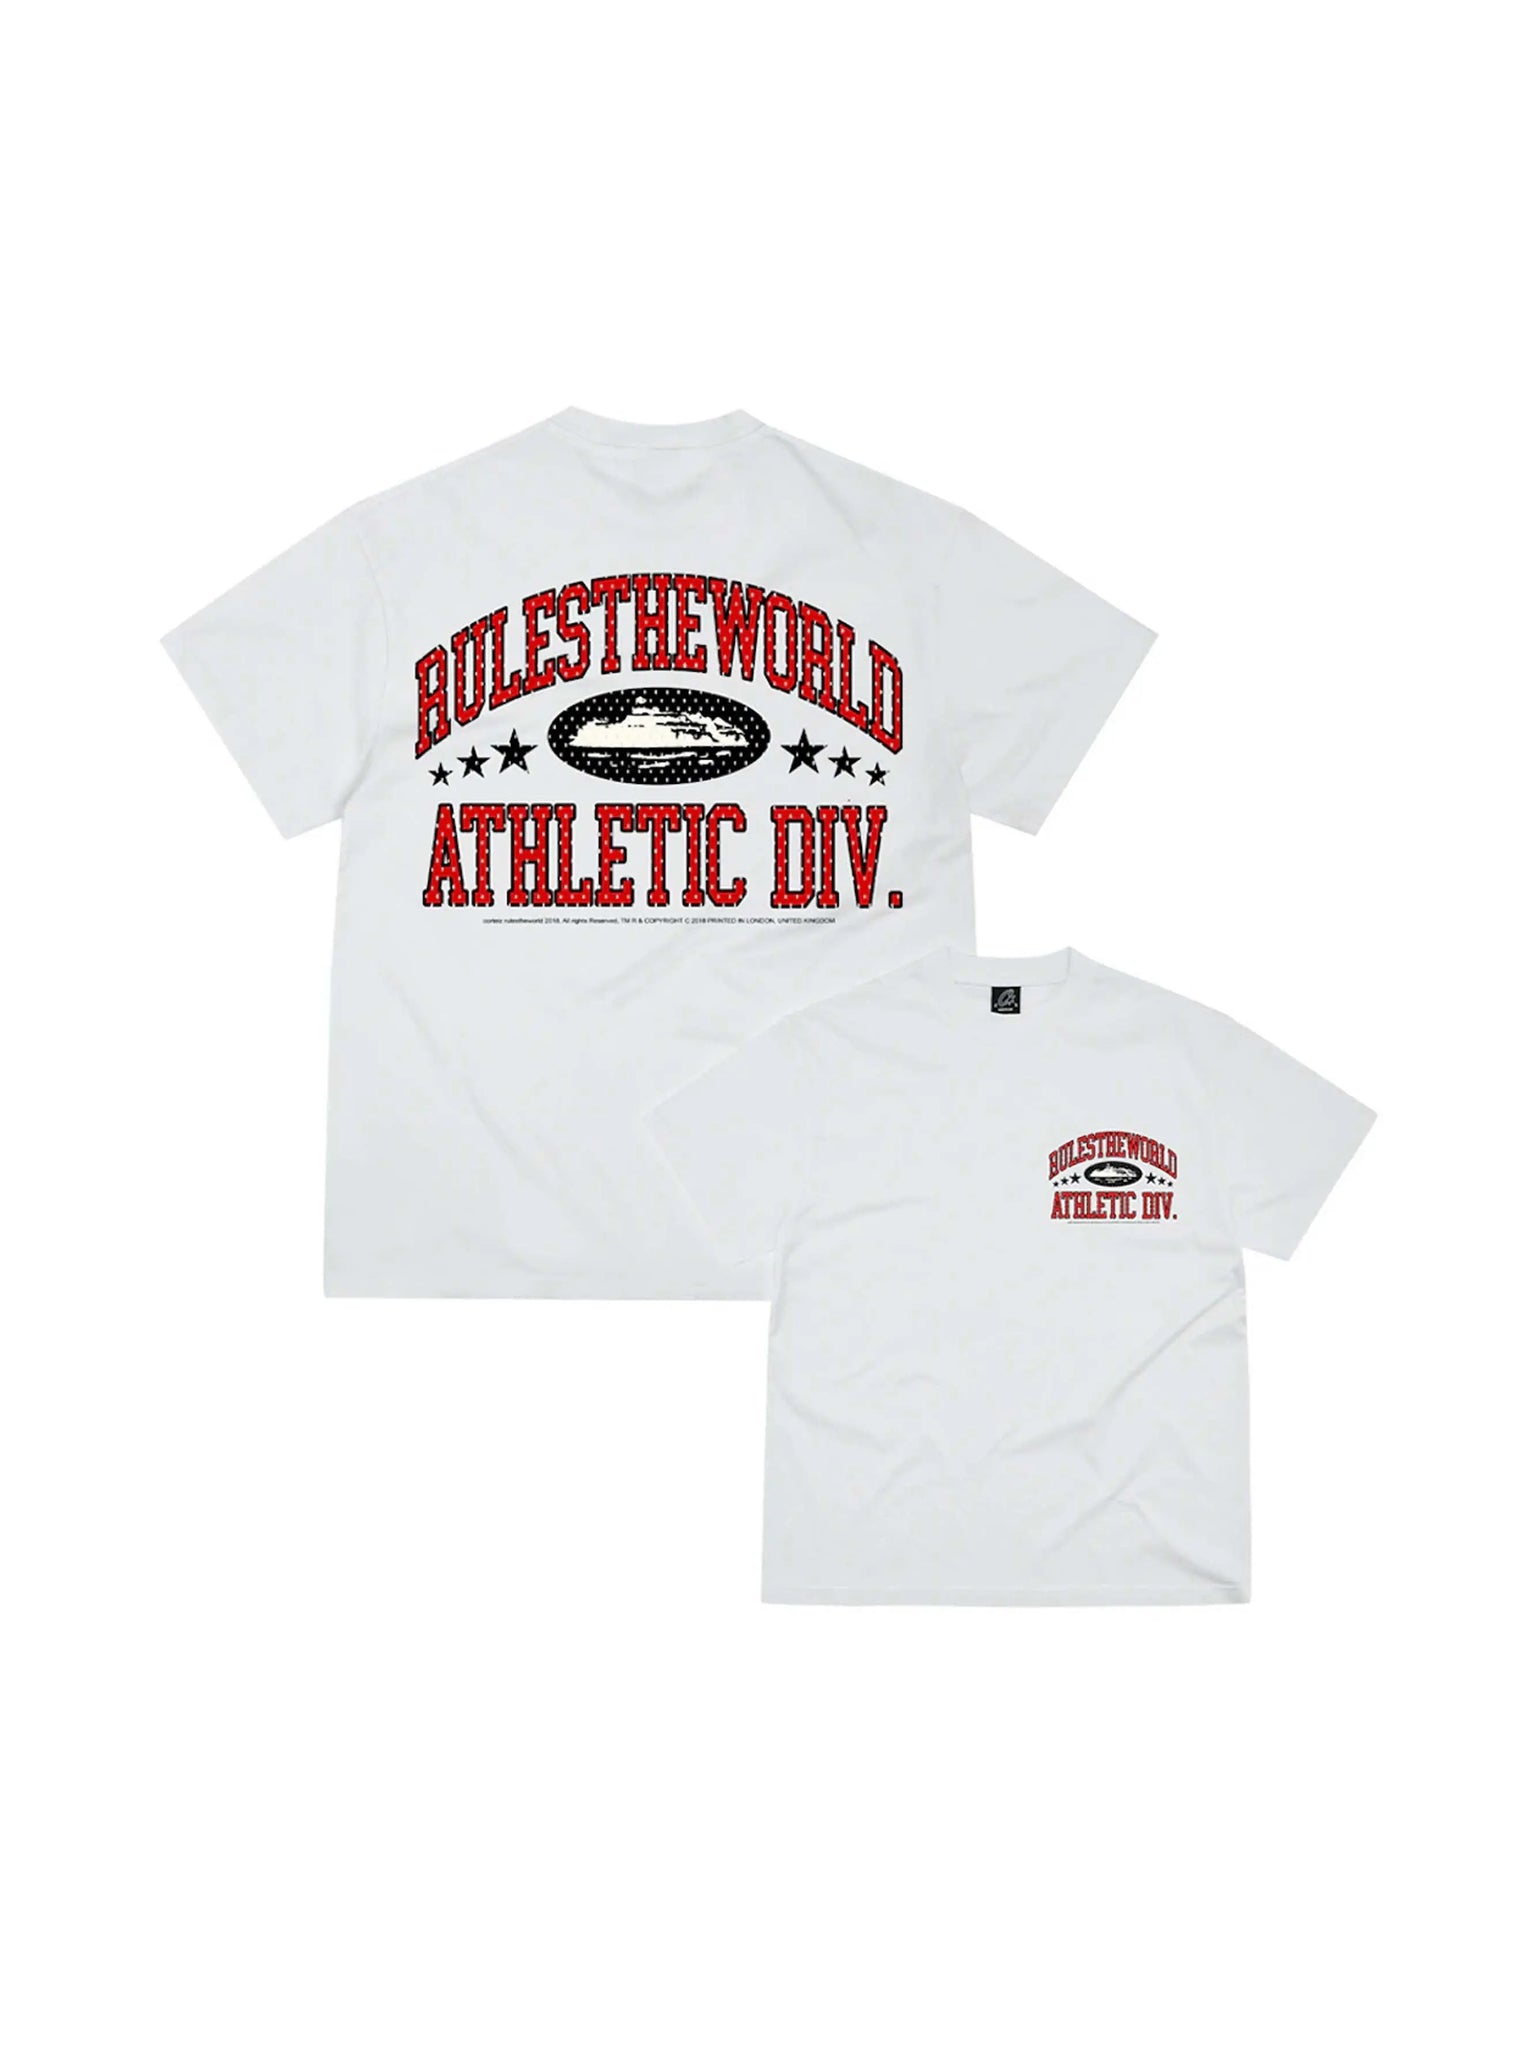 Corteiz RTW Athletic Division Tee White/Red in Auckland, New Zealand - Shop name